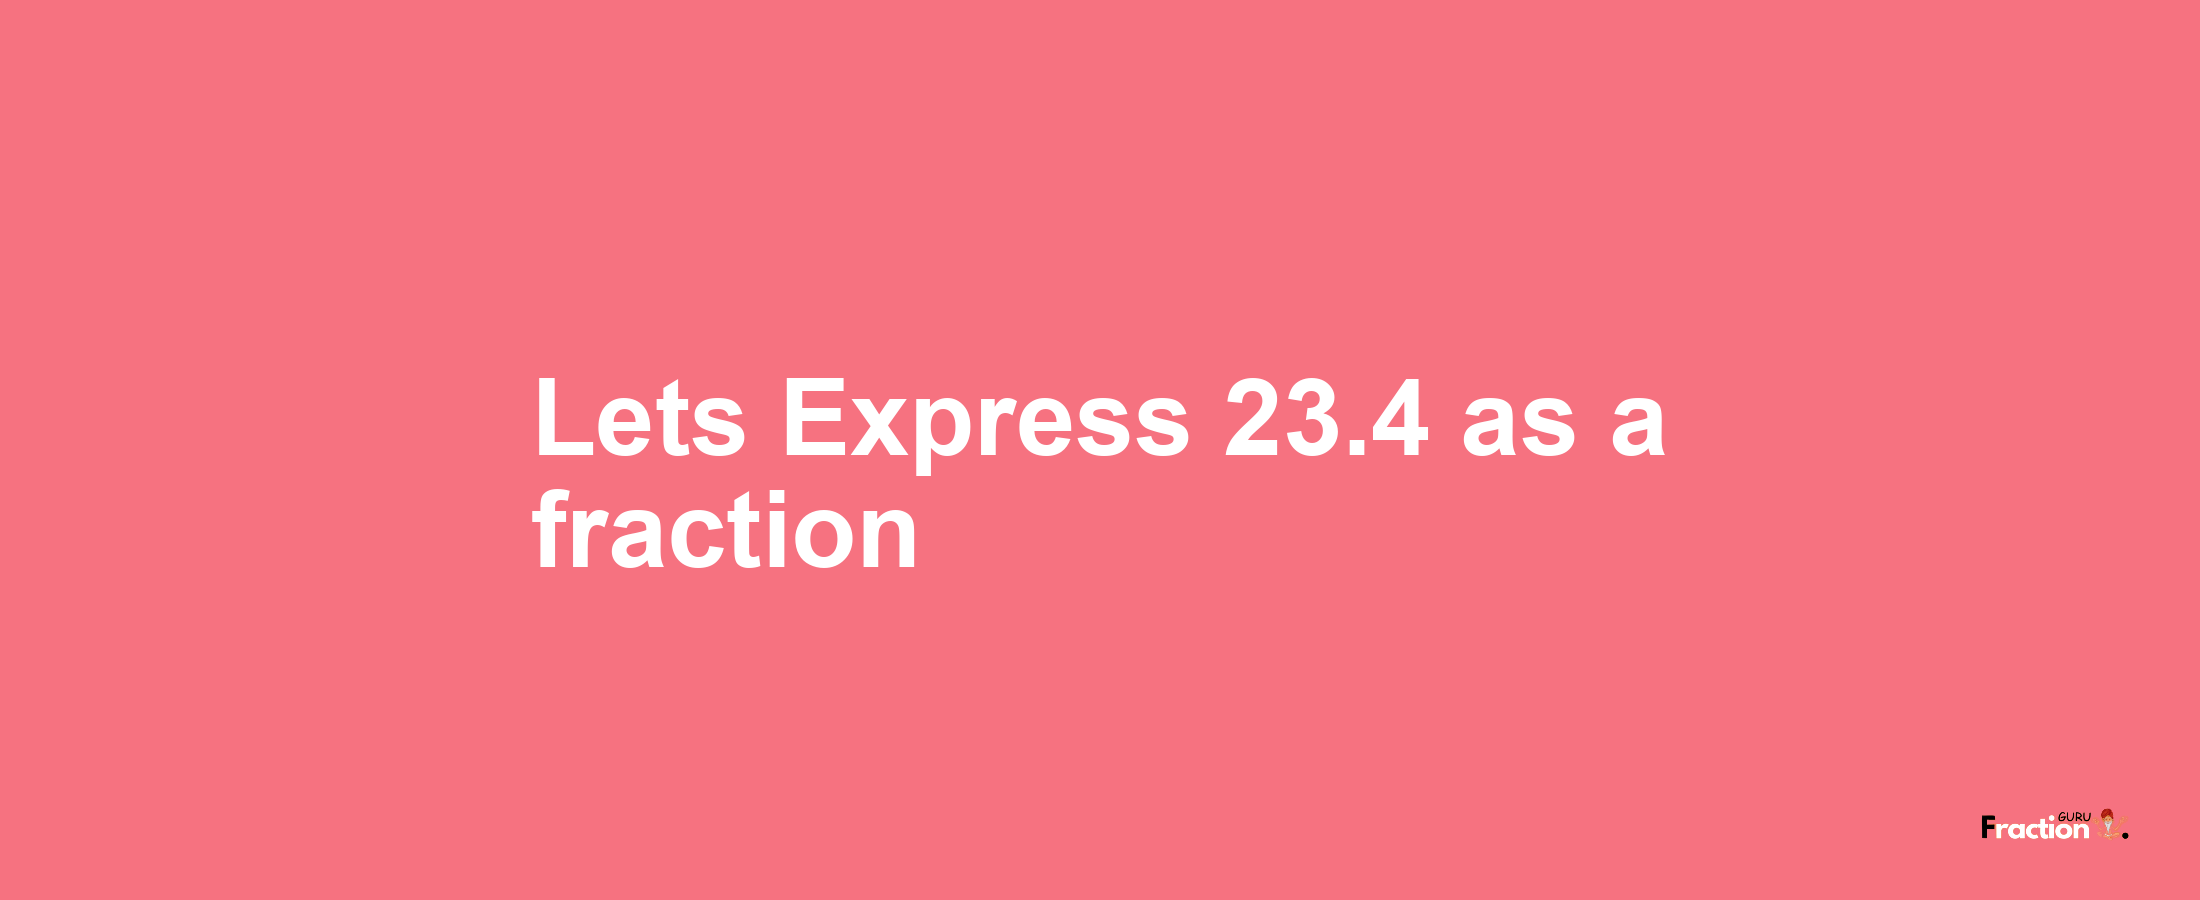 Lets Express 23.4 as afraction